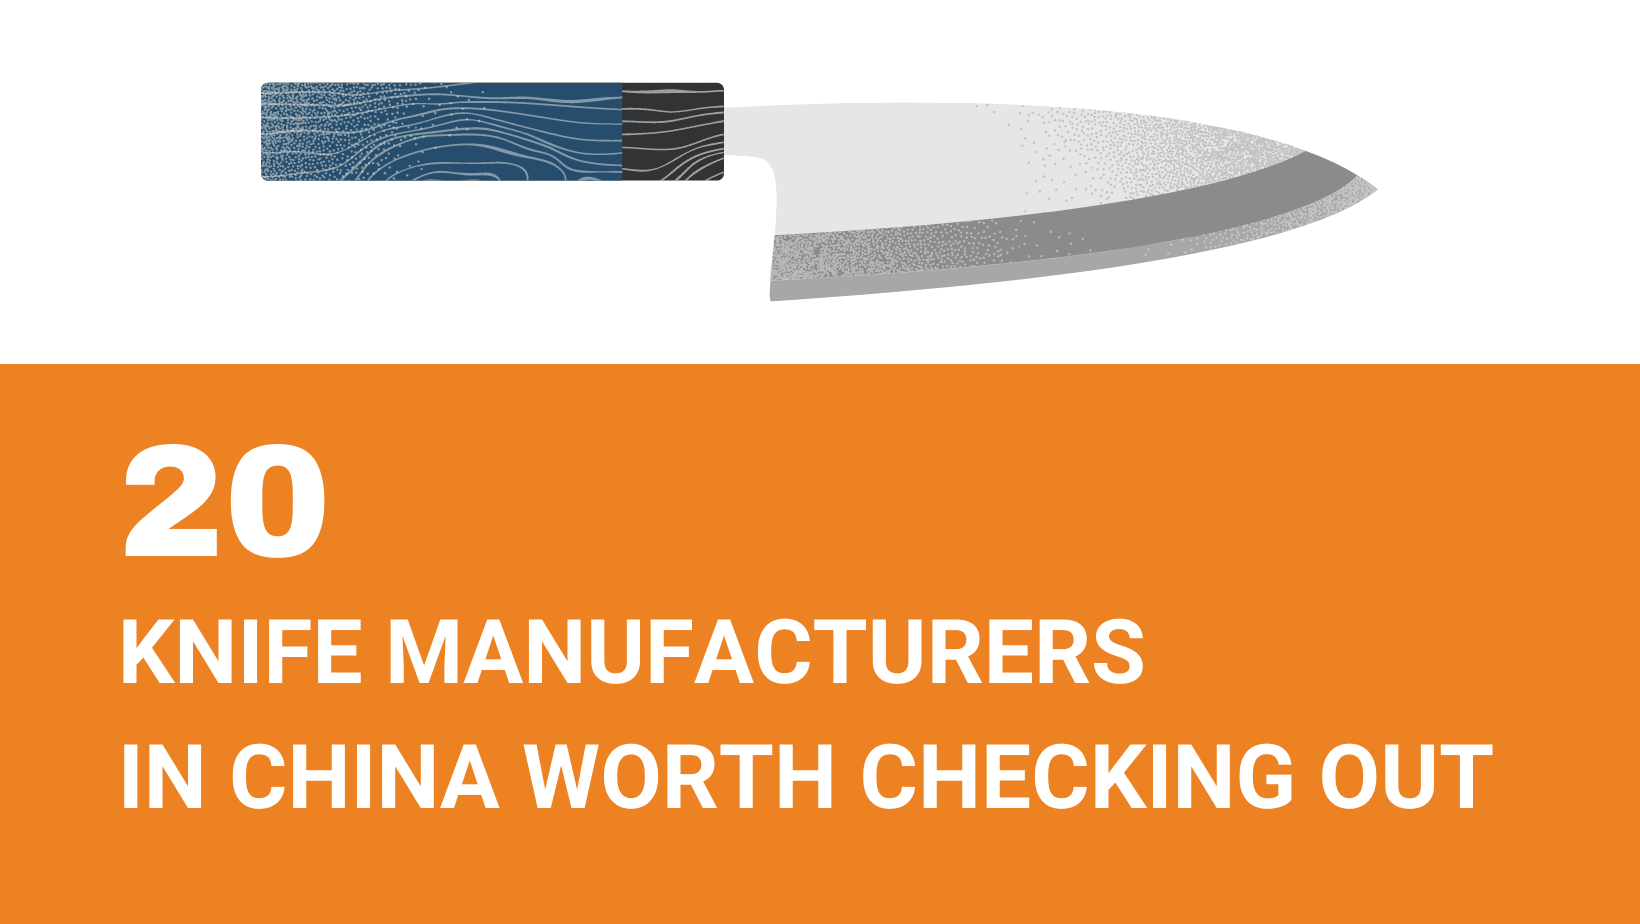 https://cdn.nichedropshipping.com/wp-content/uploads/2021/12/Knife-manufacturers.png